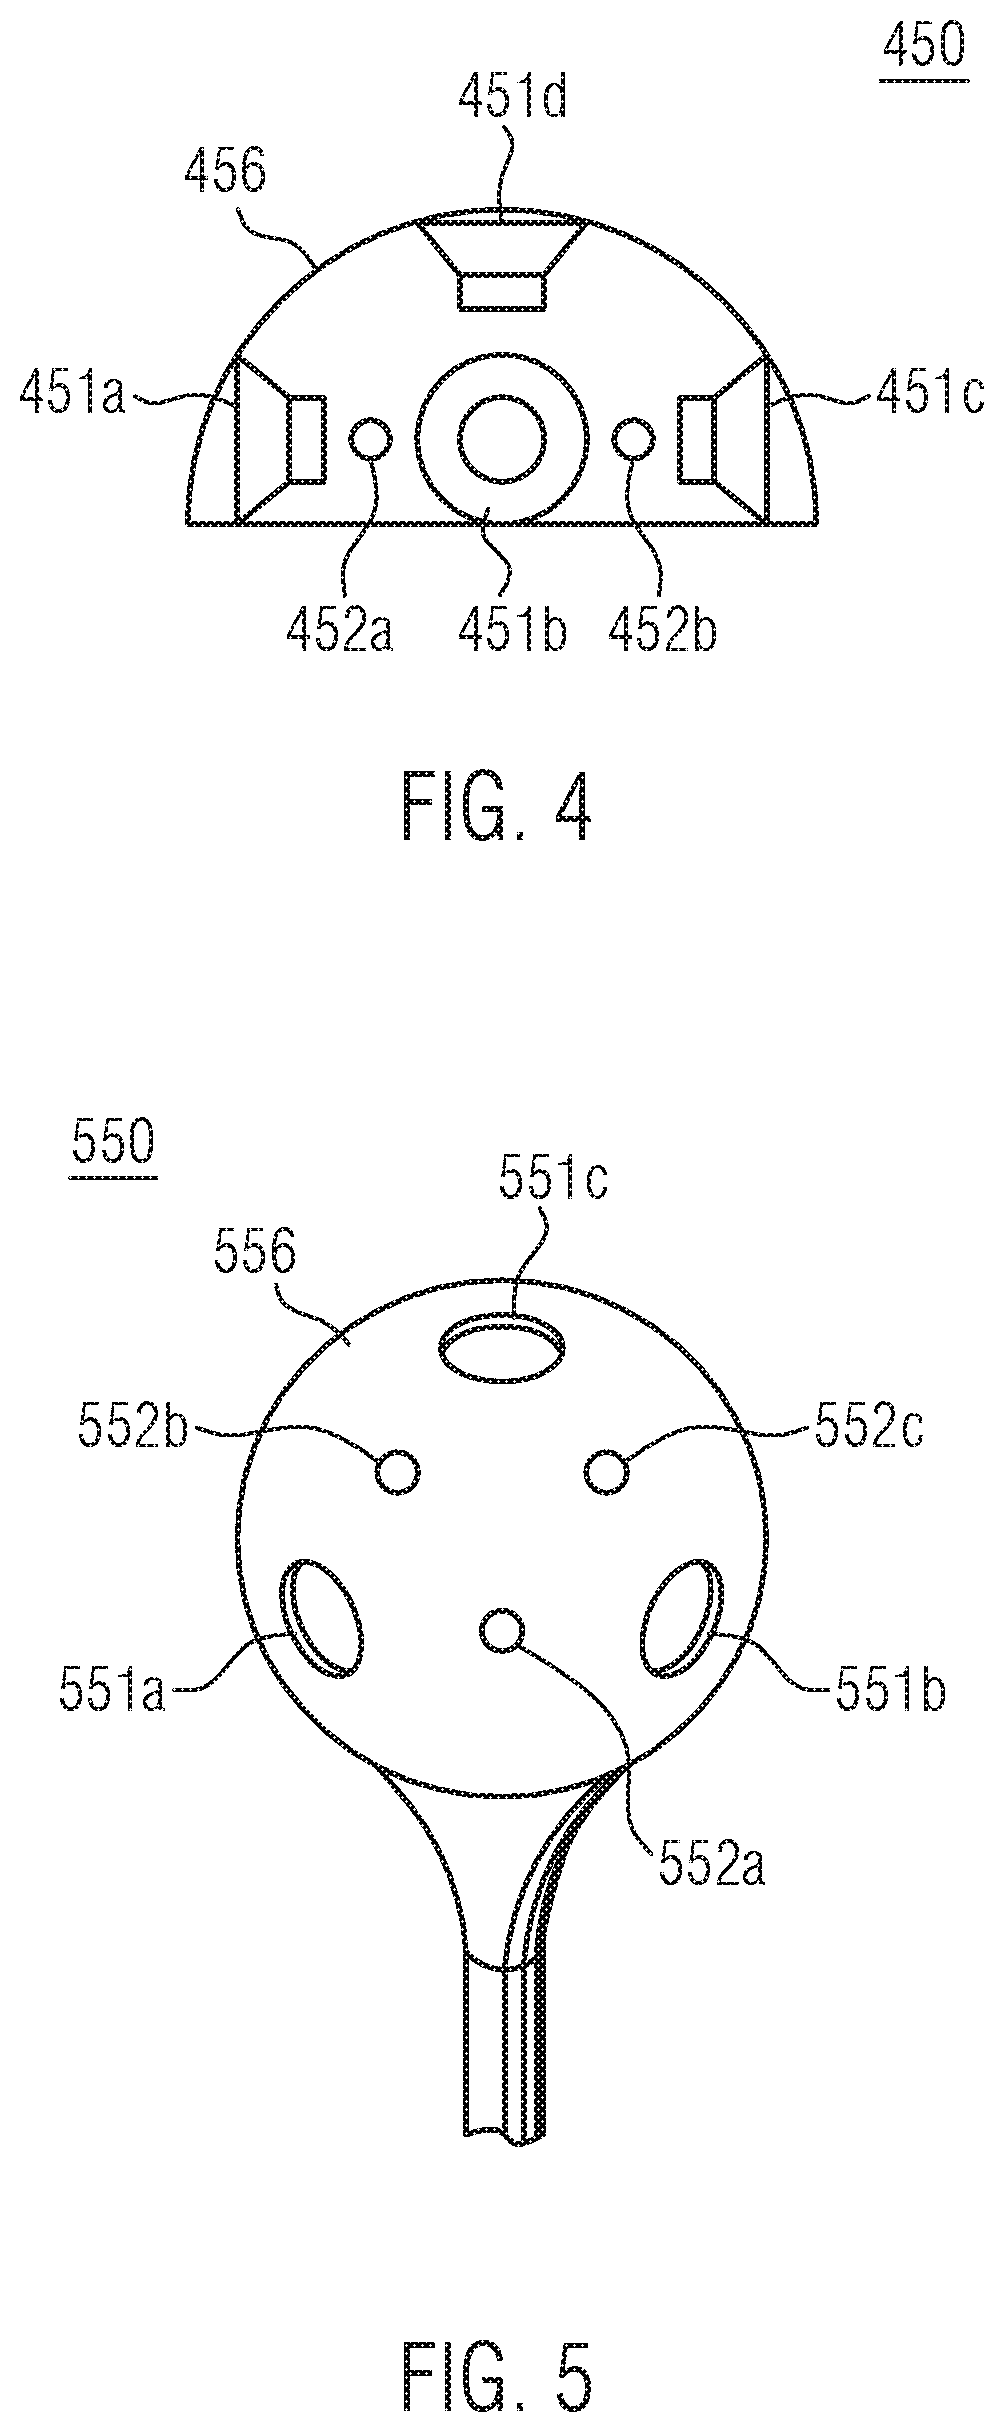 Apparatus and method using multiple voice command devices